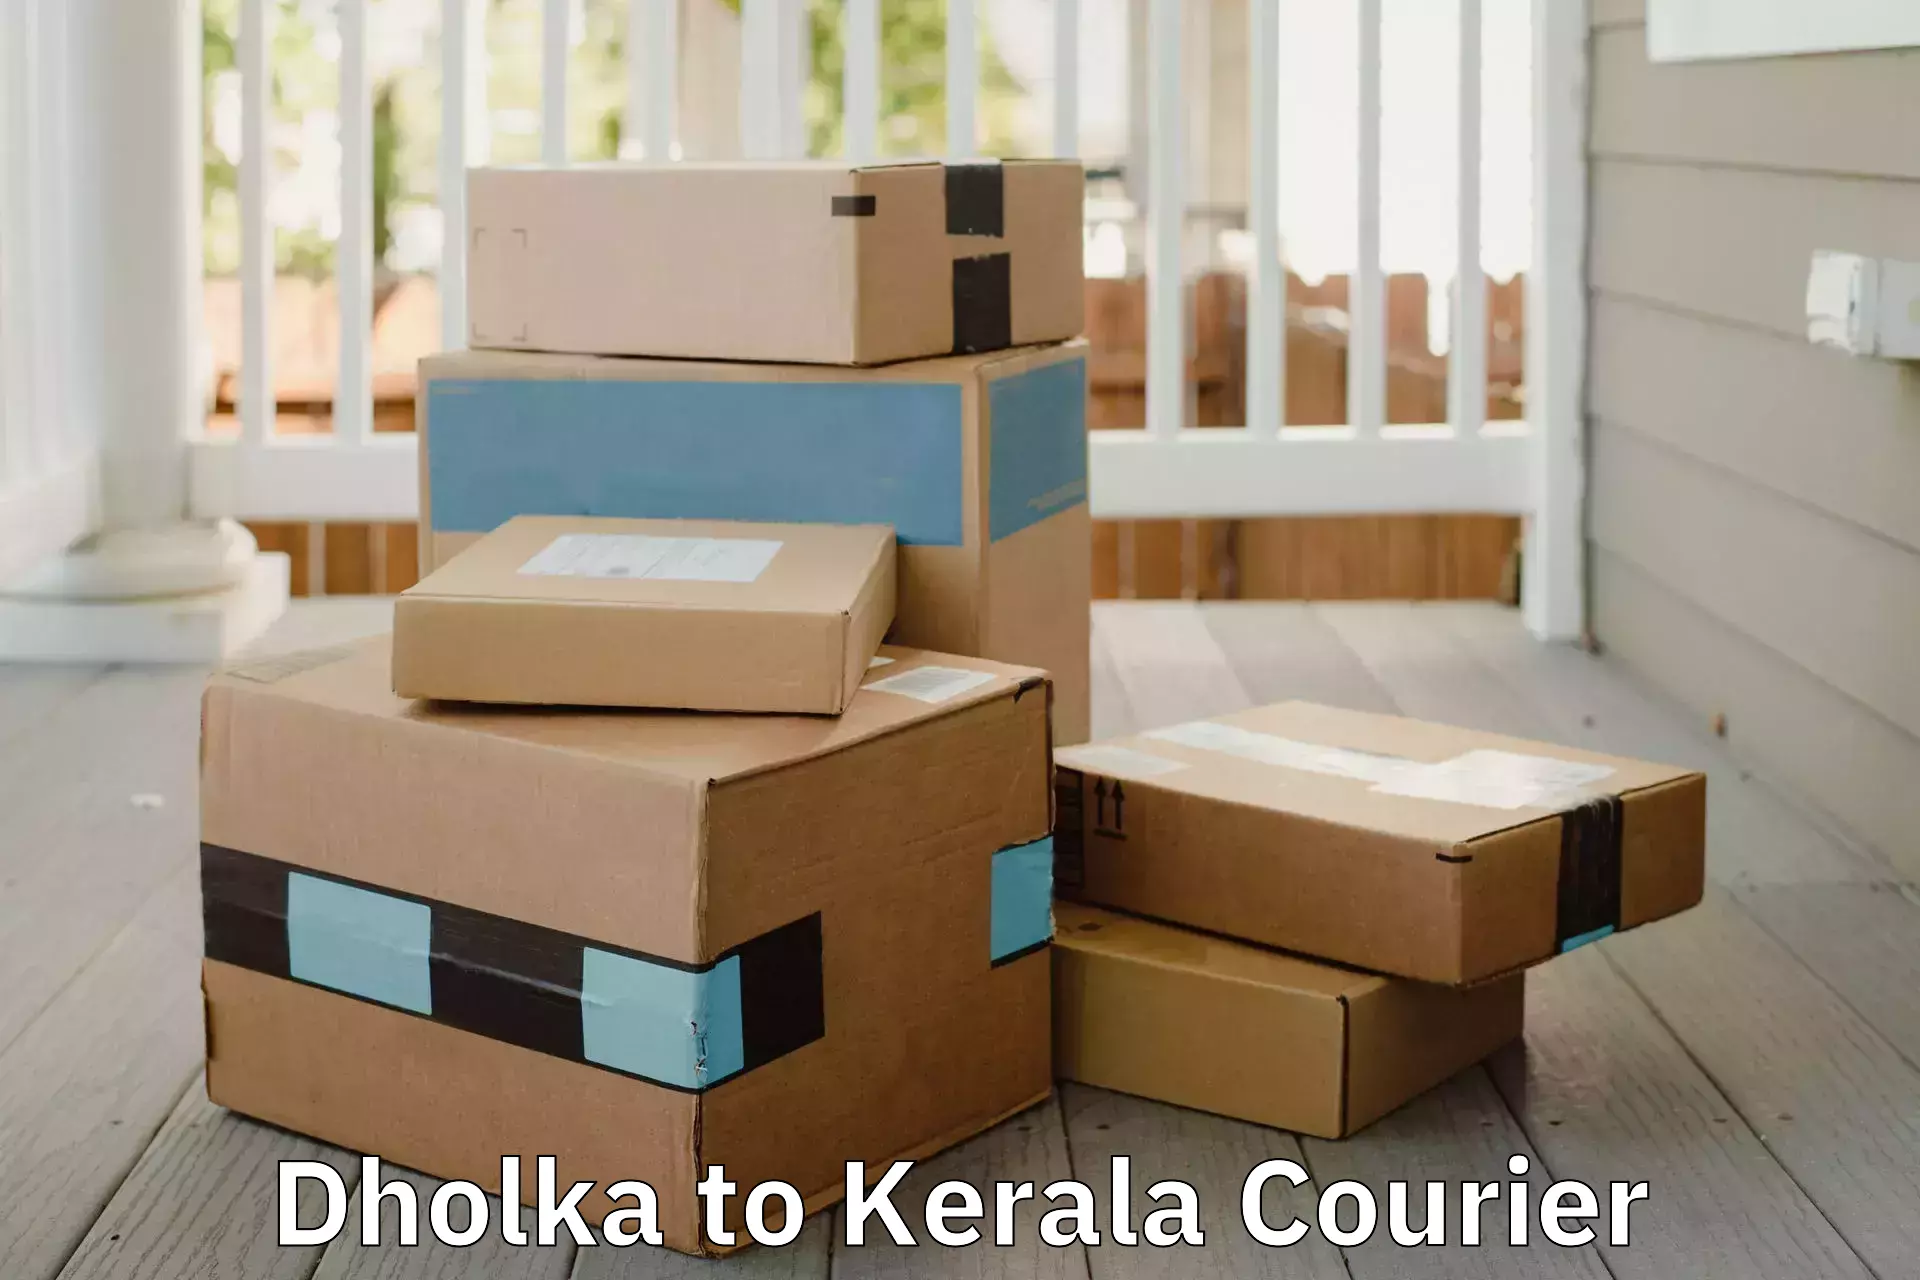 Full home moving services Dholka to Cochin Port Kochi